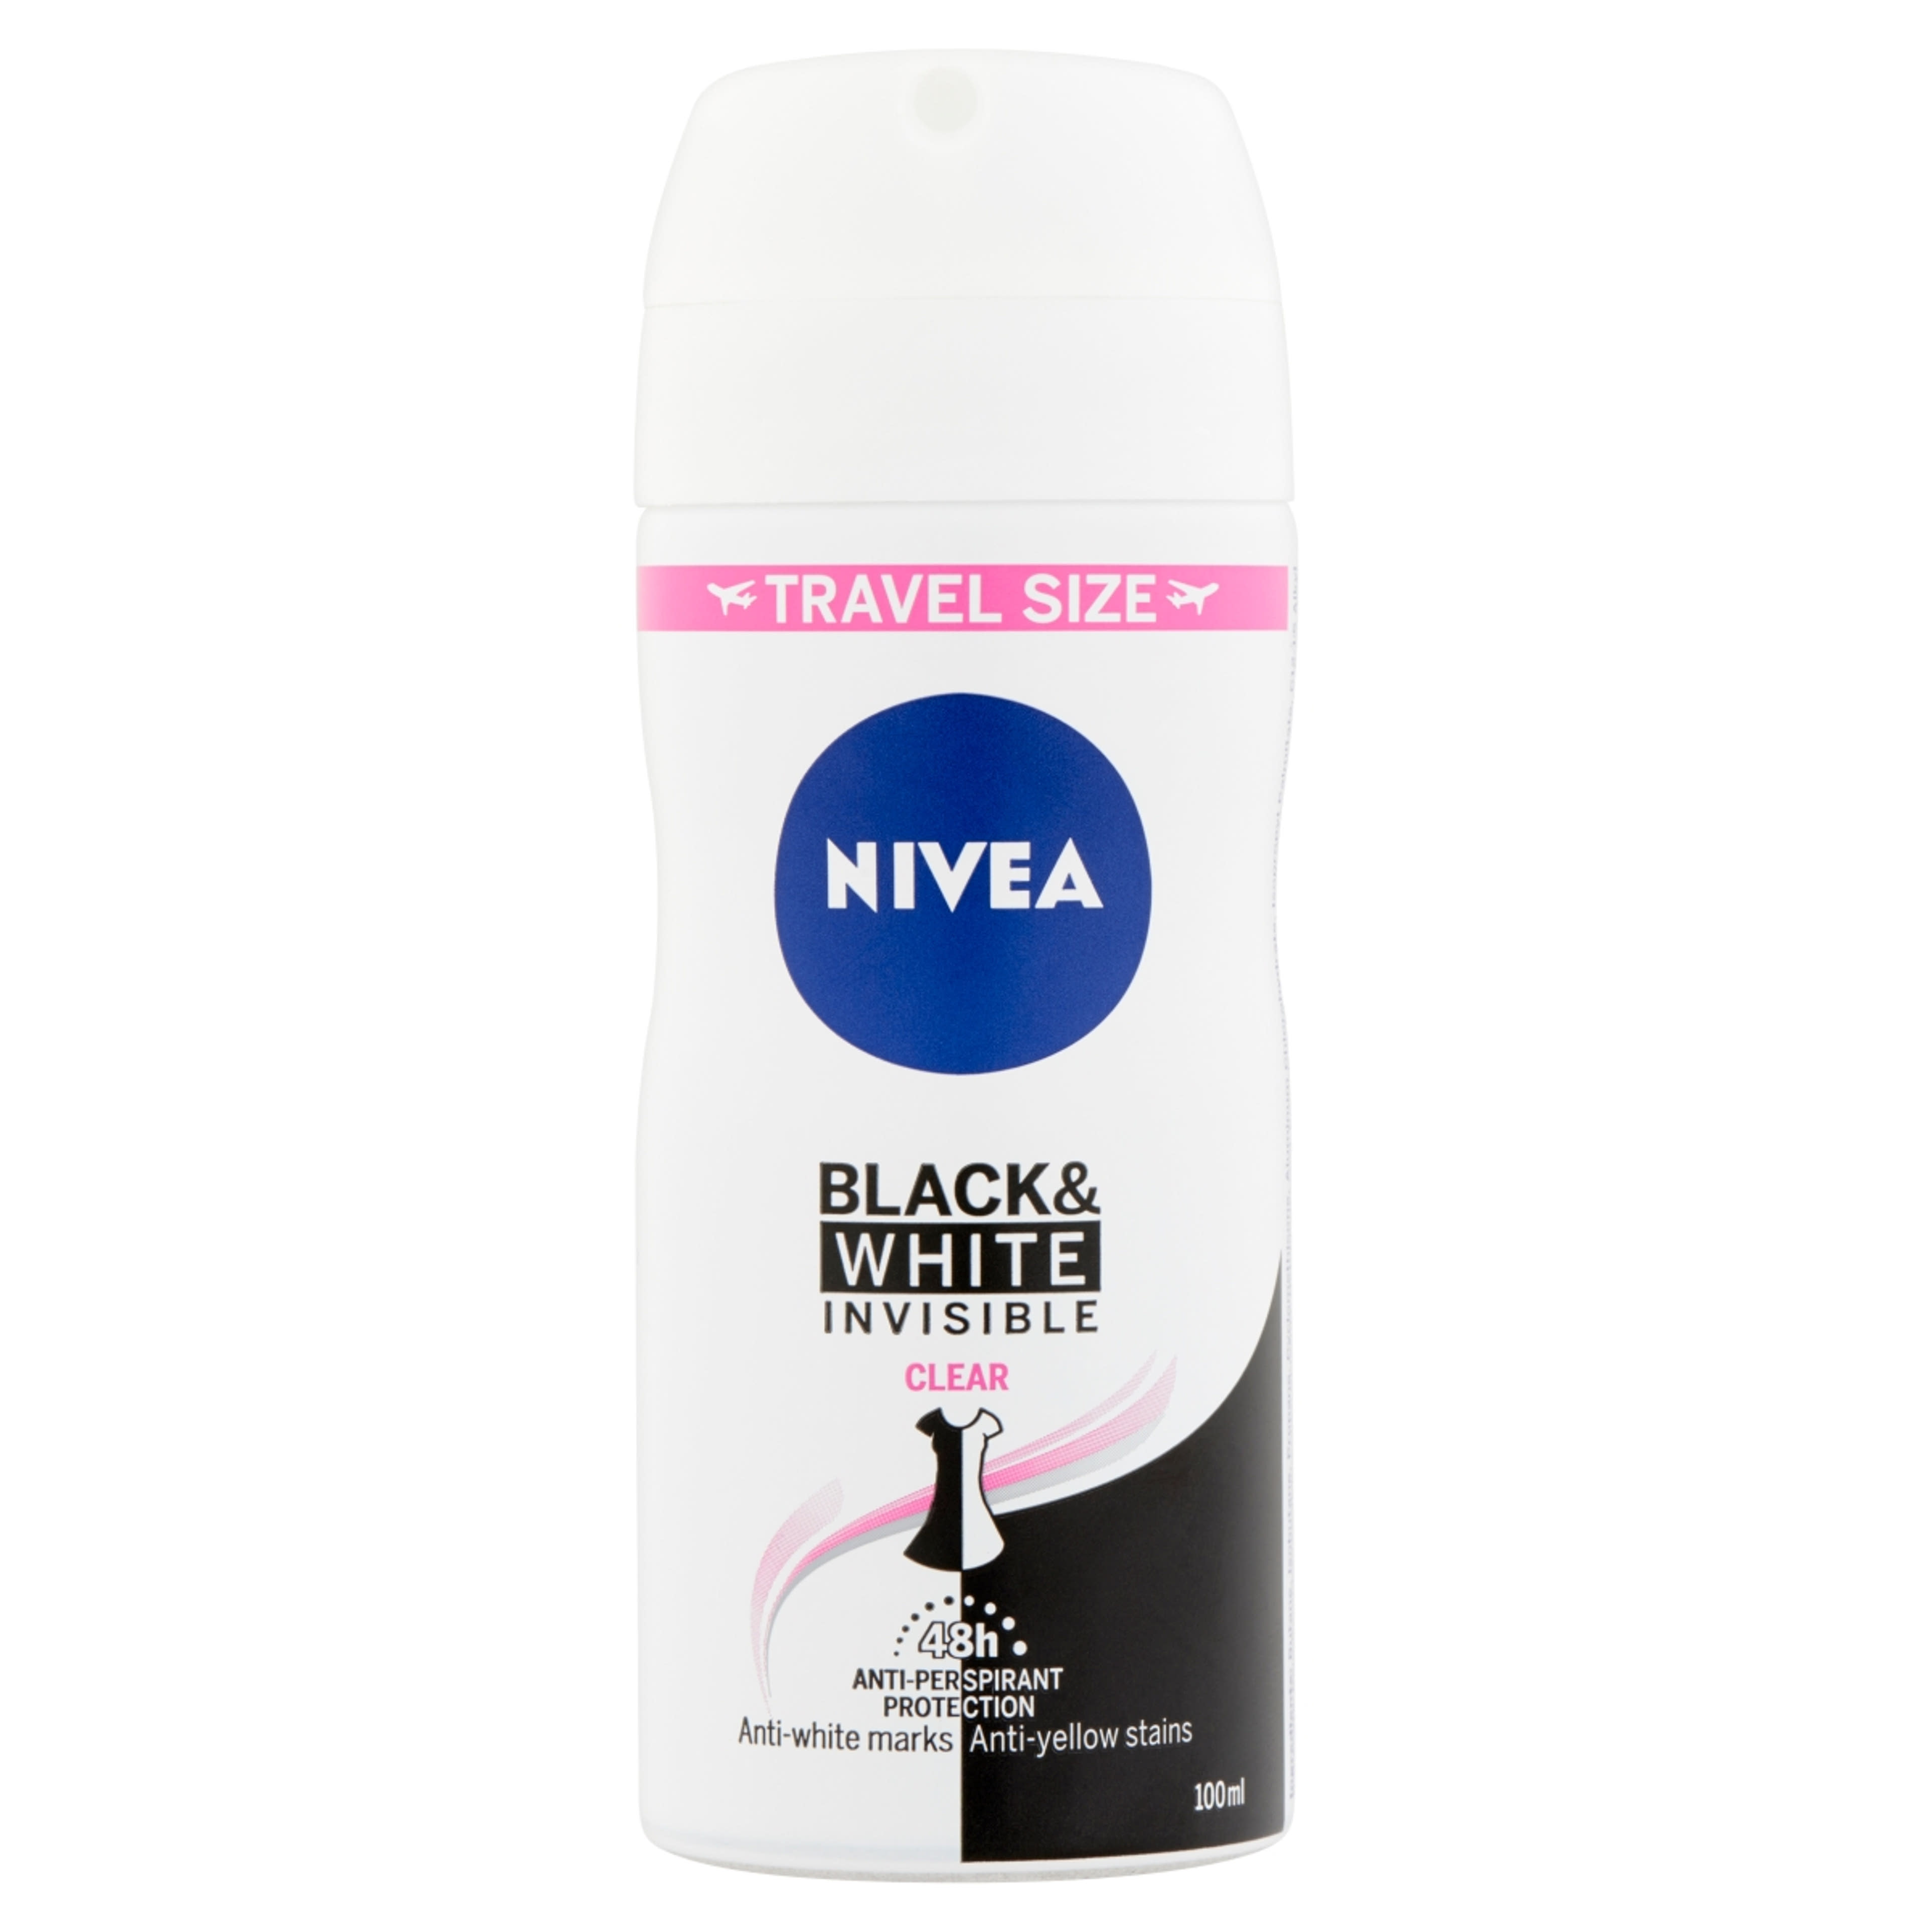 NIVEA Deo spray for Black & White Invisible Clear Pocket Size - 100 ml